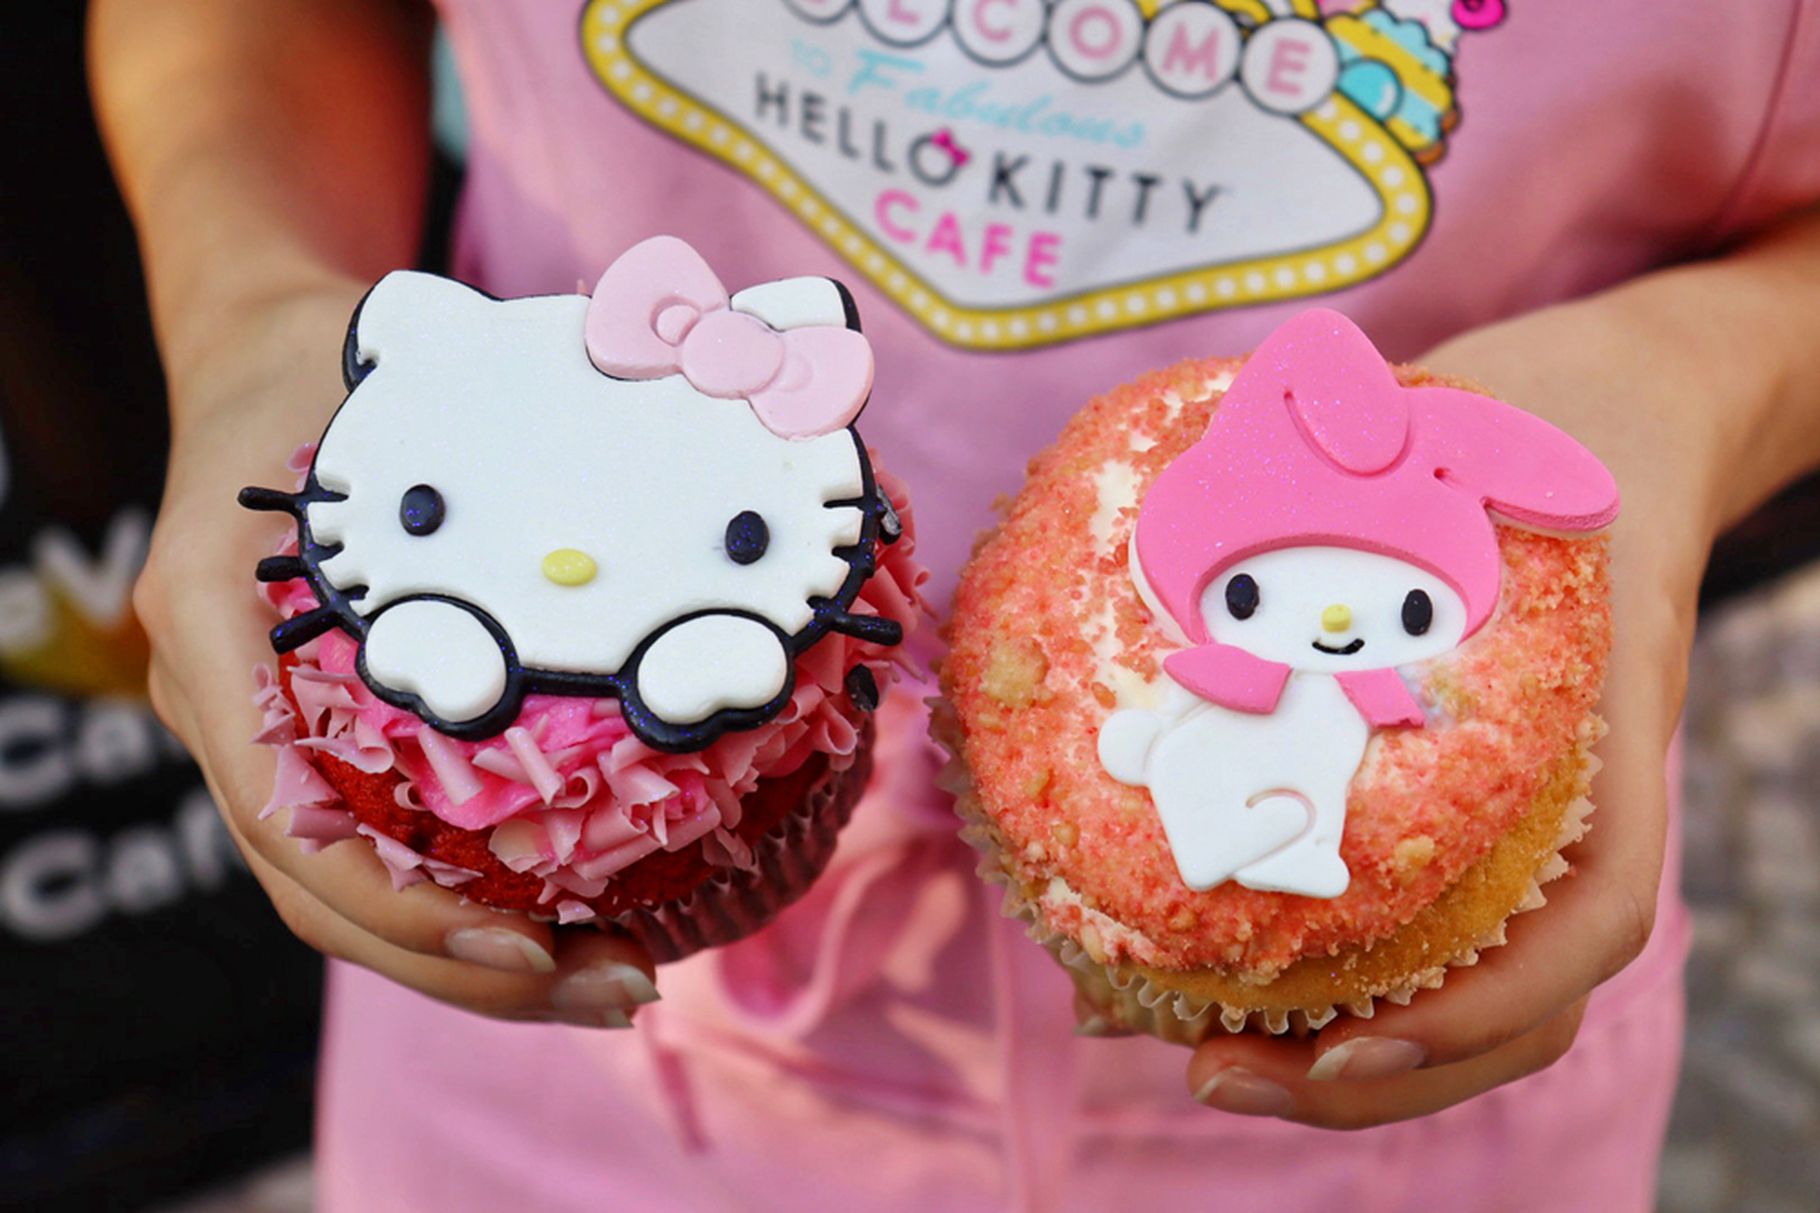 Hello Kitty Cafe unveils a new fall menu Eater Vegas